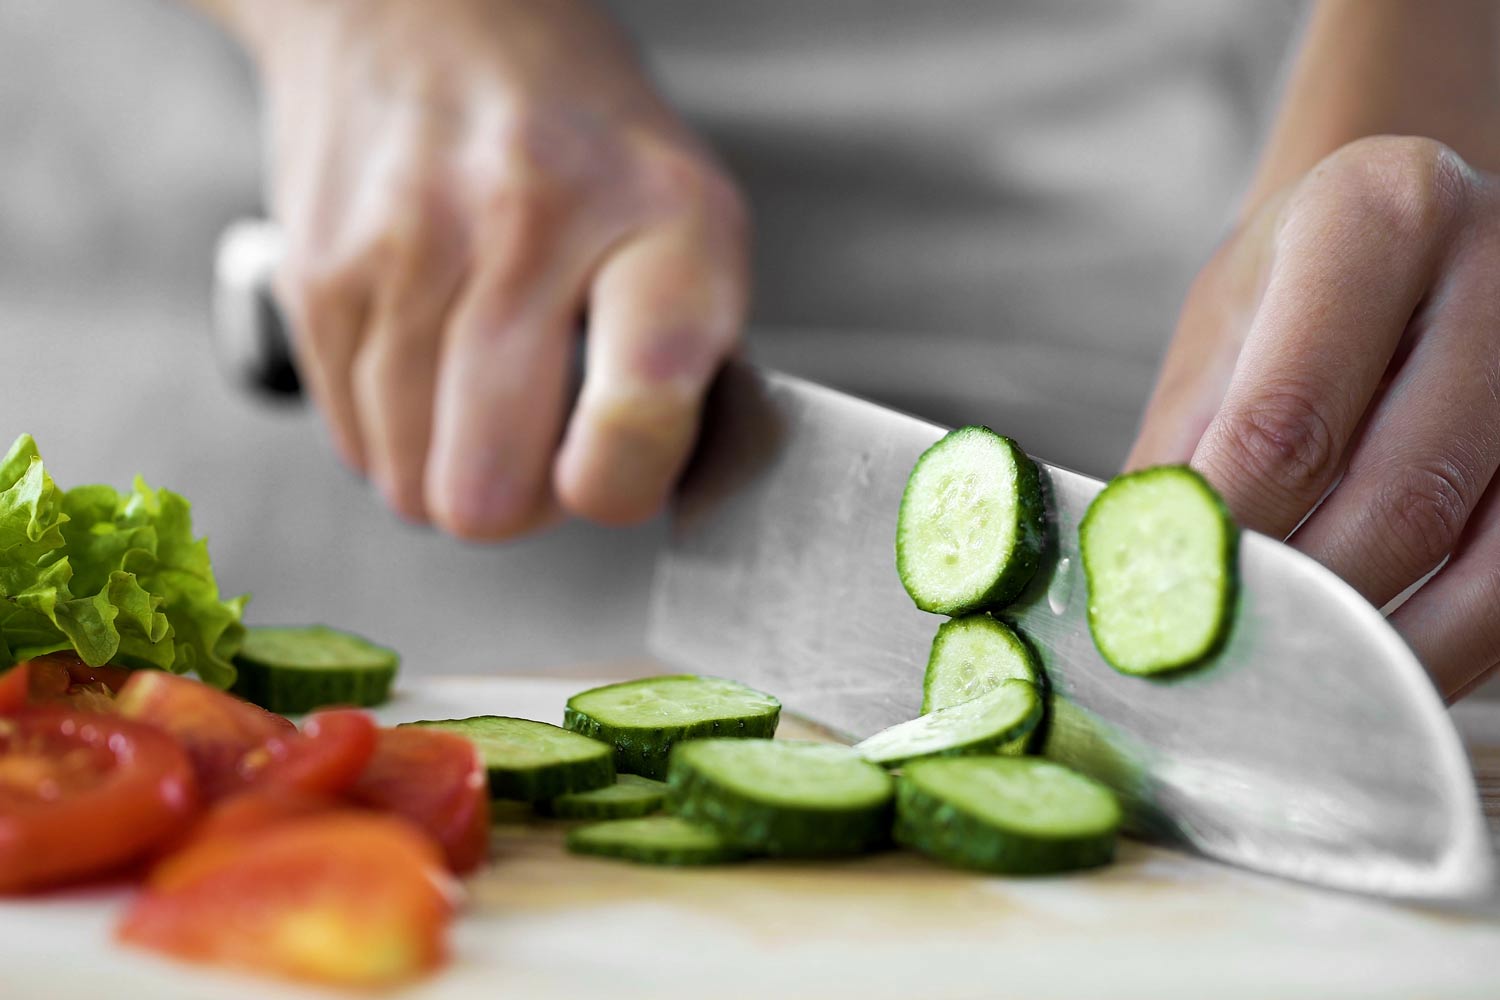 Learning to slice vegetables